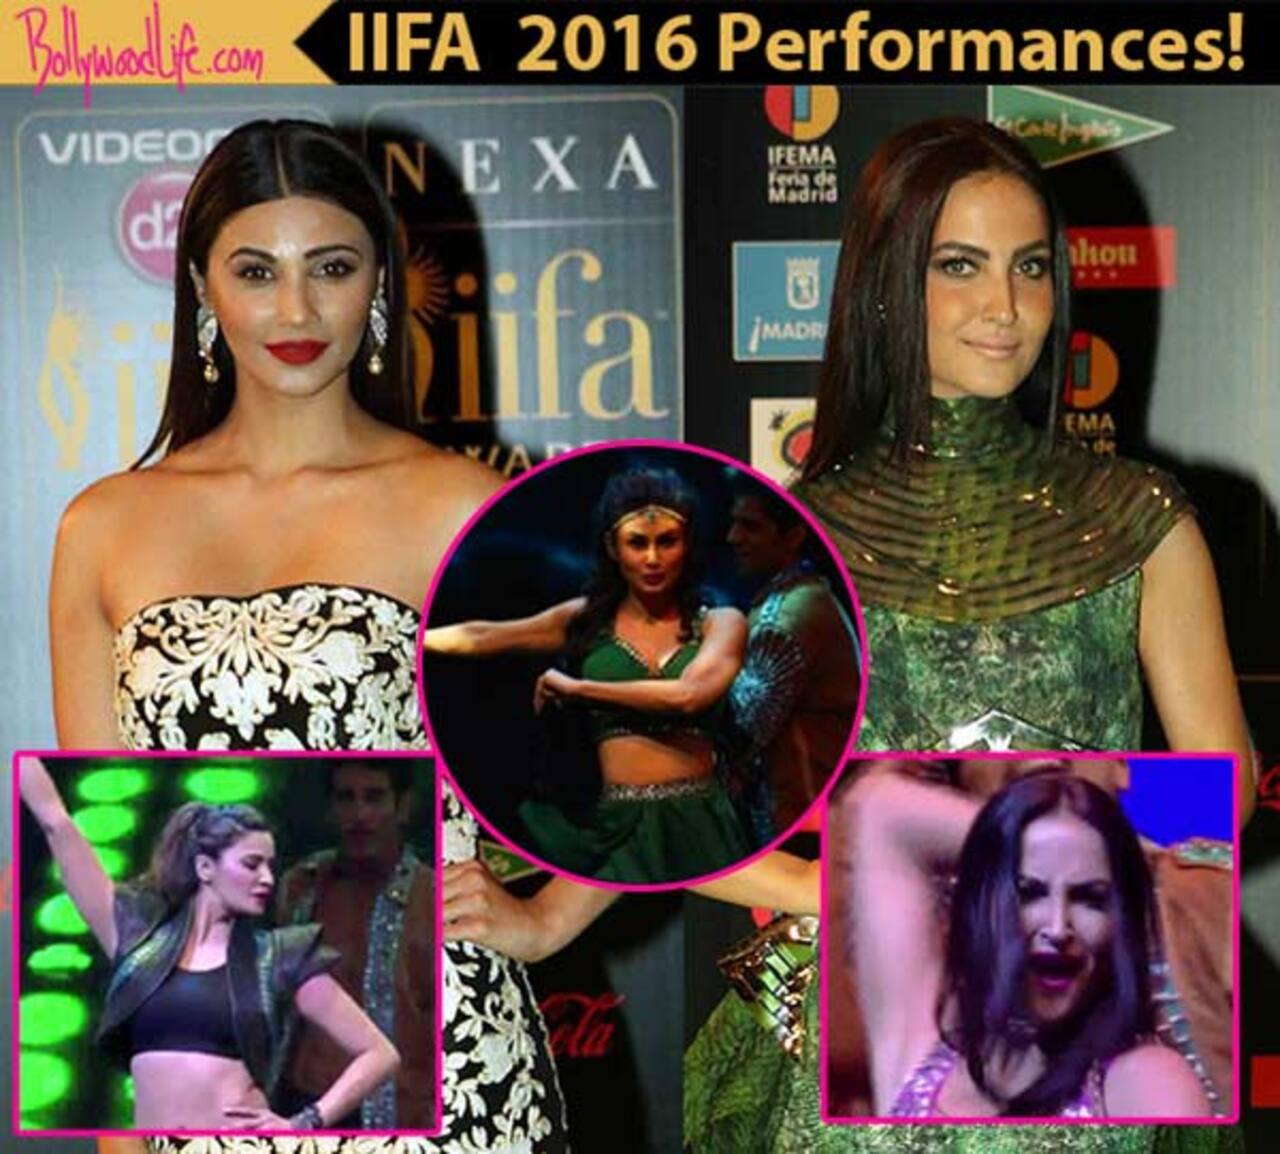 IIFA Rocks 2016: Daisy Shah, Mouni Roy and Elli Avram open the show with their SIZZLING performances – watch videos!